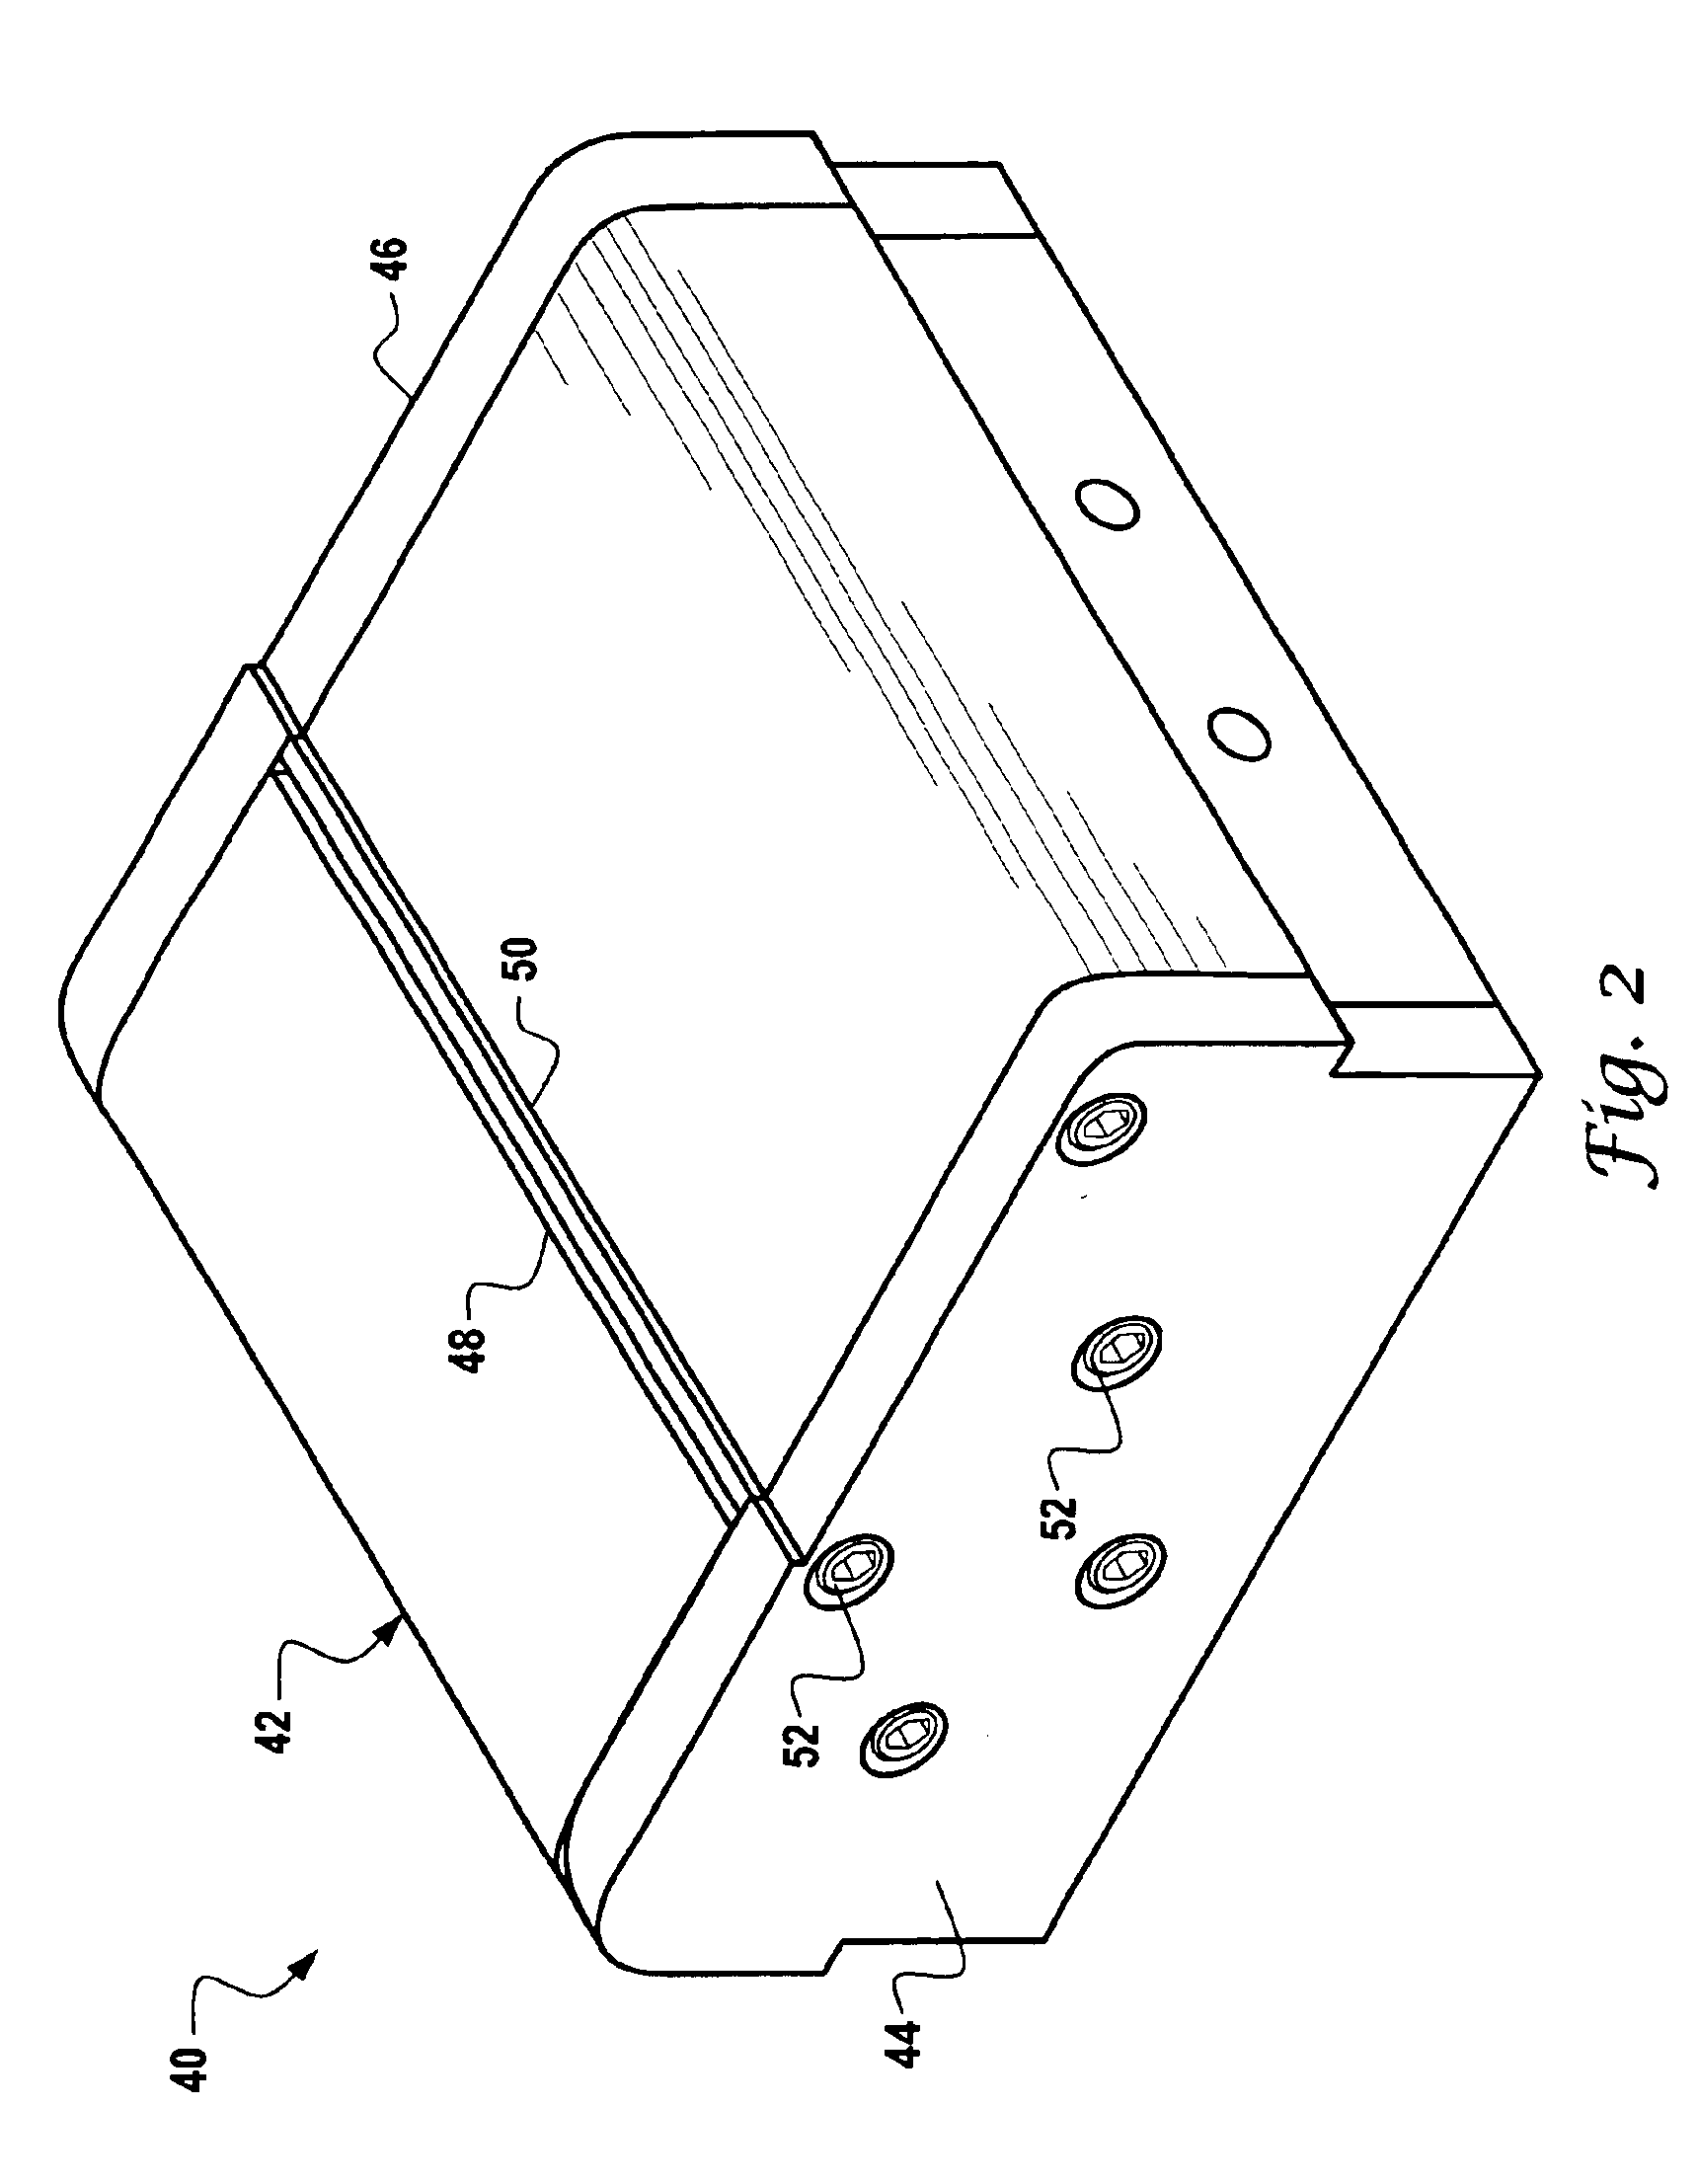 Air clamp stabilizer for continuous web materials